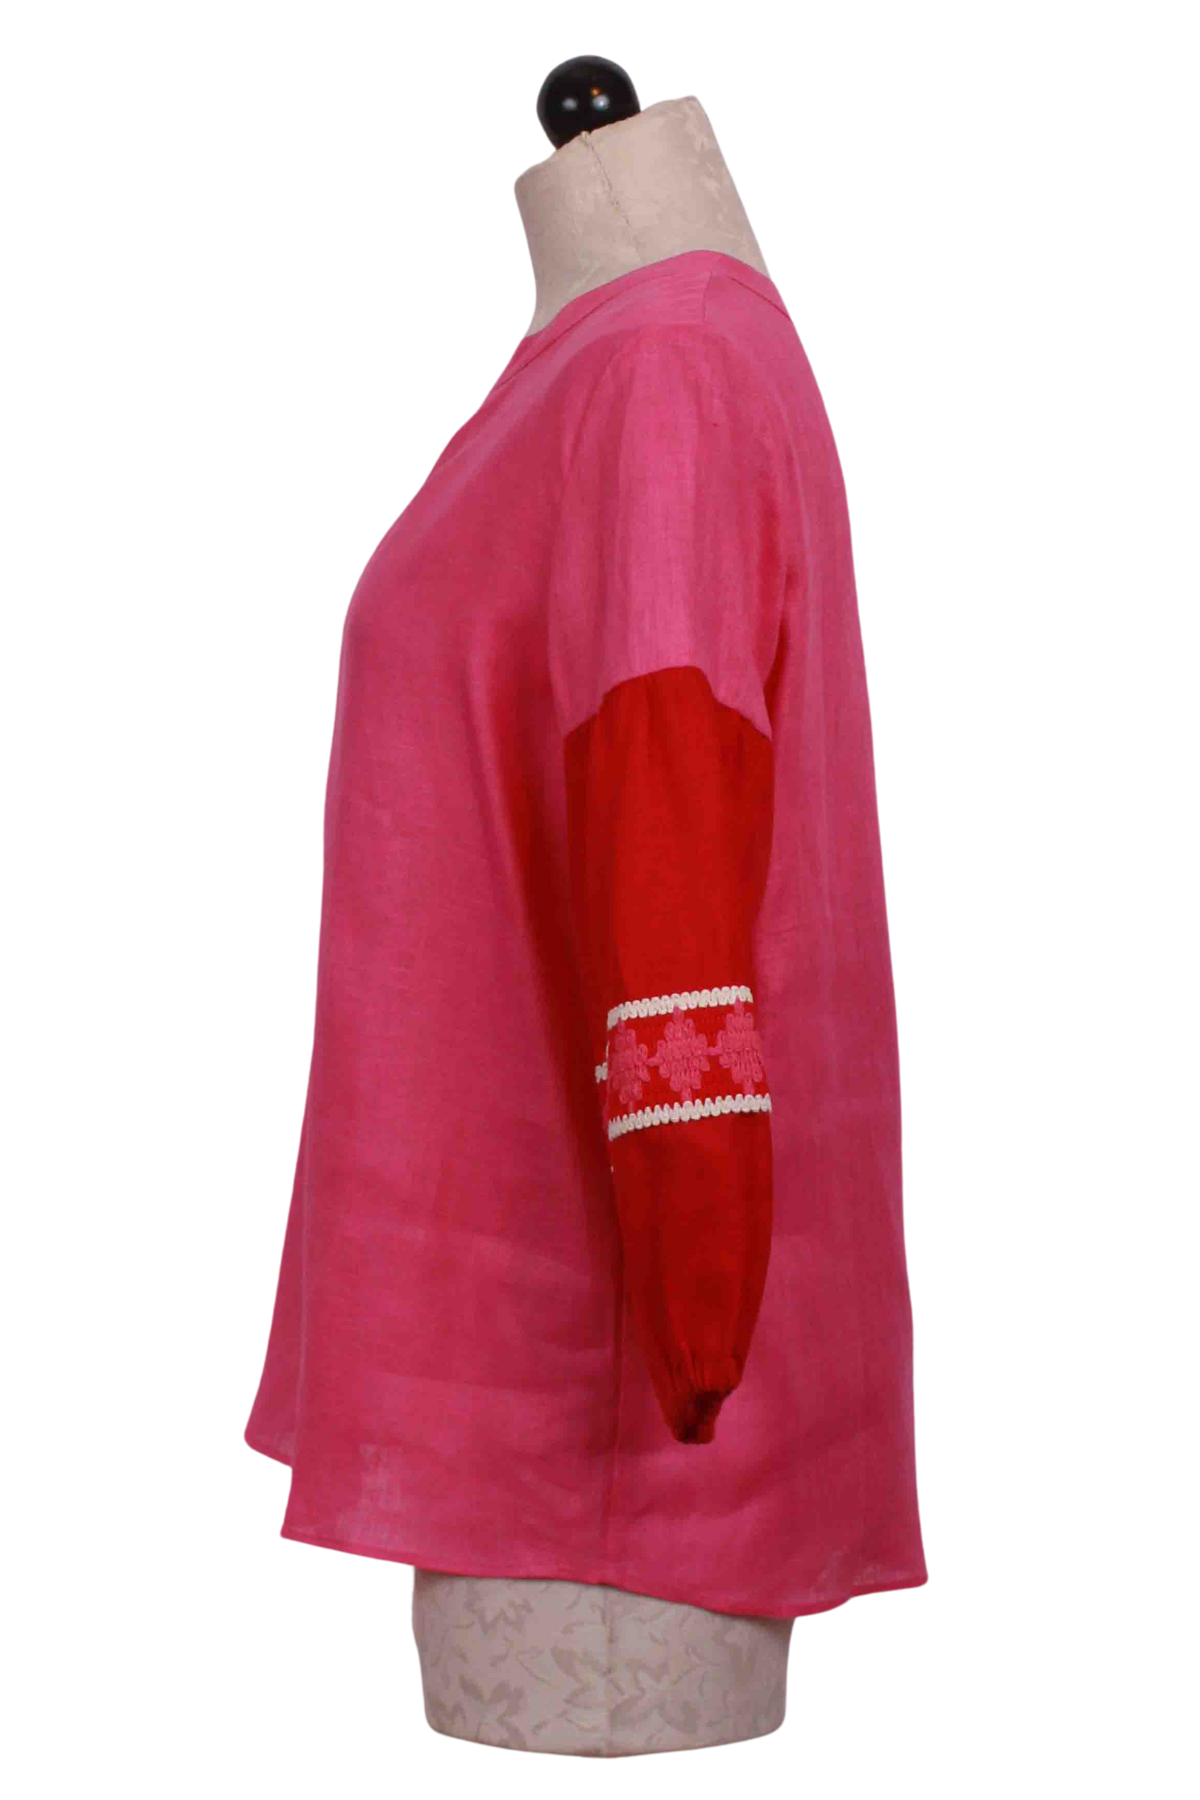 side view of Kaya Pink/Red Linen Shirt by Vilagallo